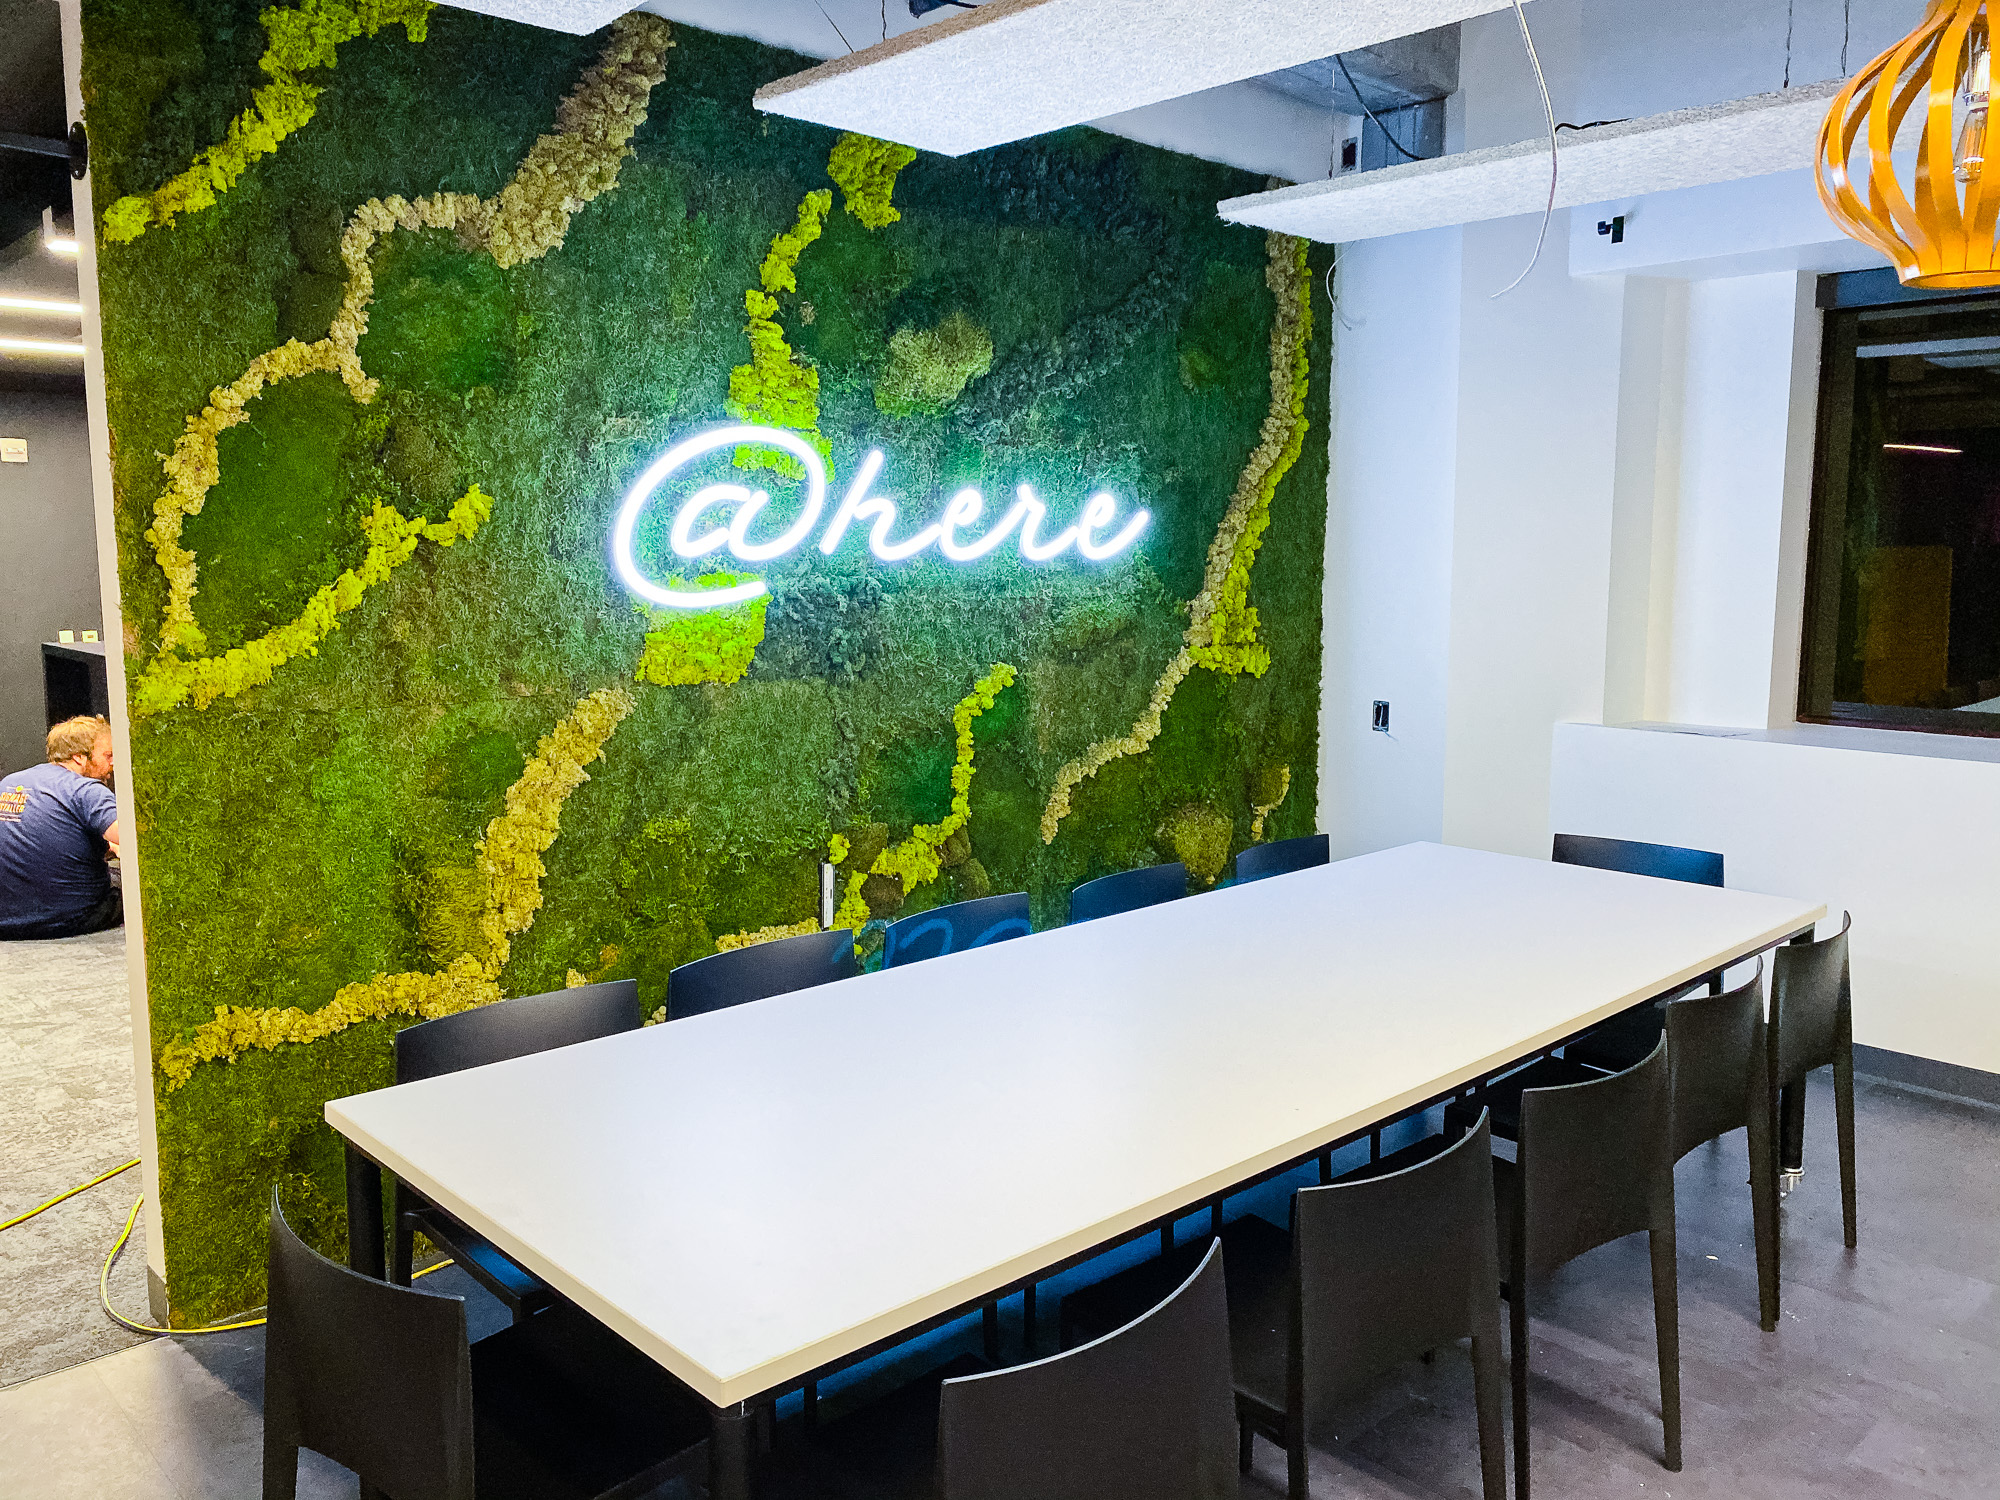 Neon-style @here sign on moss / living wall for the cafeteria/kitchen of Scale, a San Francisco based company delivering high quality training data for AI applications such as self-driving cars, mapping, AR/VR, robotics, and more.